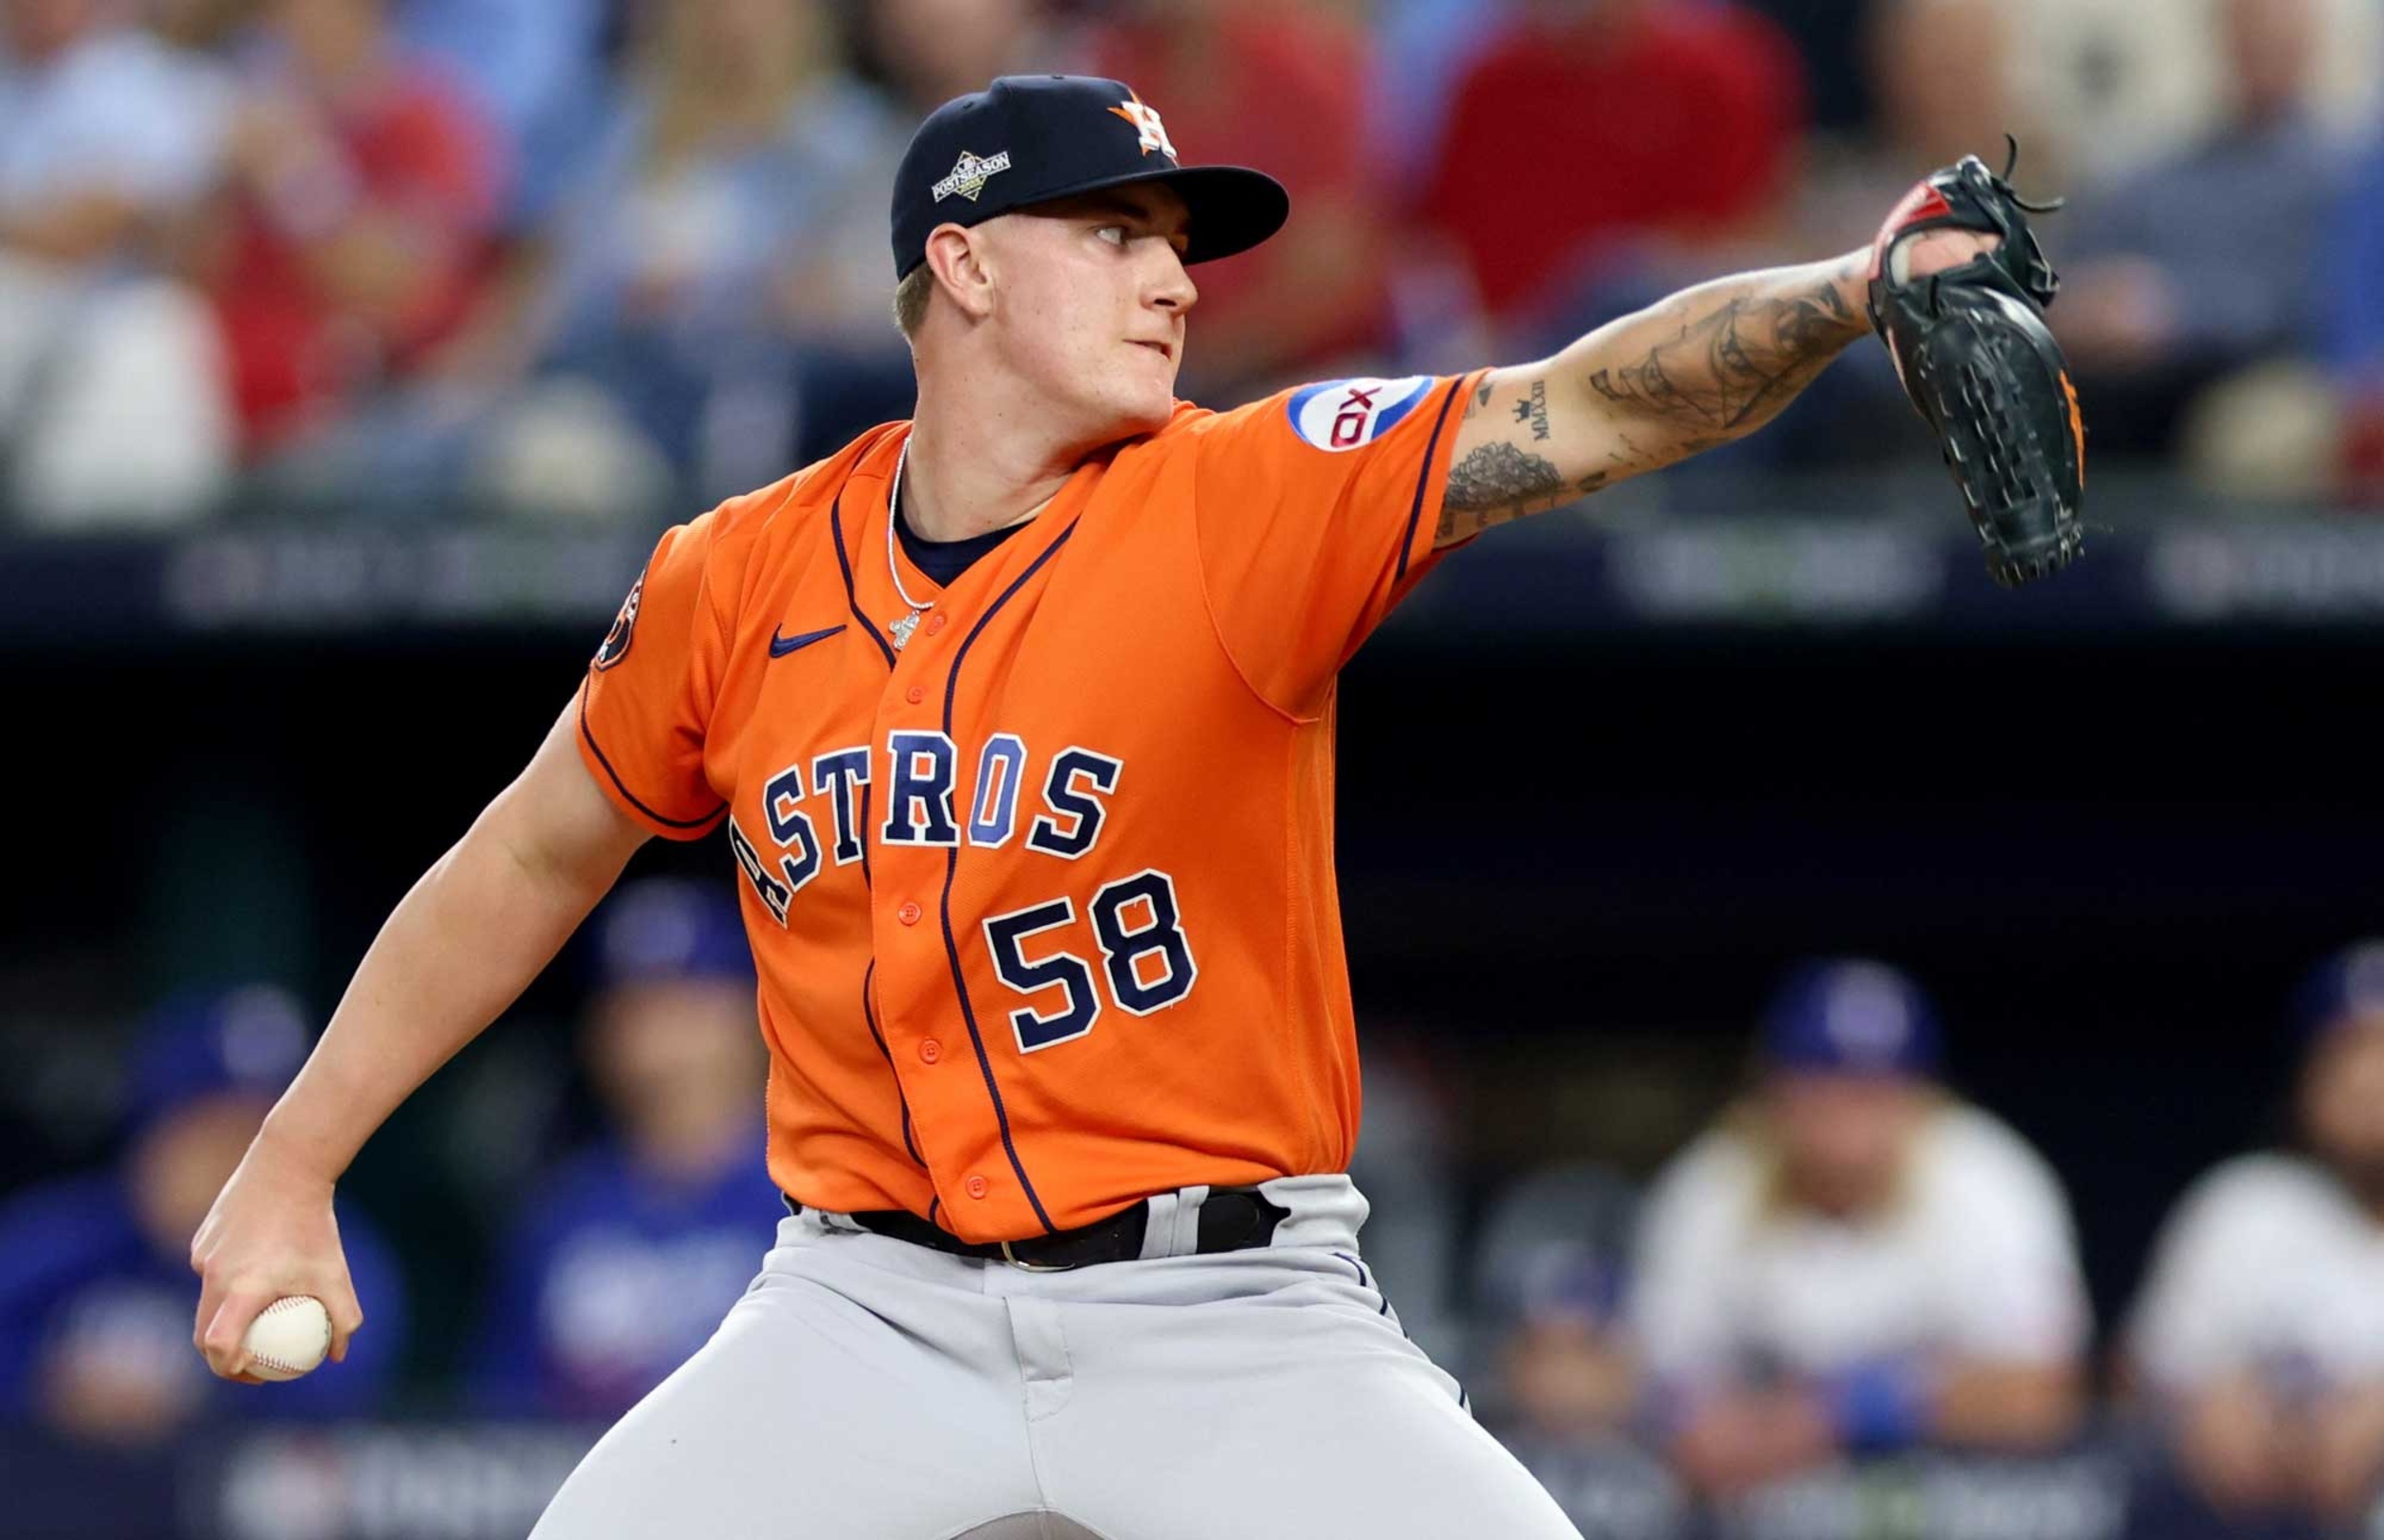 <p>Brown failed to fulfill expectations last year after a great showing down the stretch in 2022. The Astros are still relying on him in 2024, particularly with Justin Verlander nursing an injury in Spring Training. The former top prospect has the ability with excellent strikeout and groundball rates.</p><p>You may also like: <a href='https://www.yardbarker.com/mlb/articles/the_24_best_players_in_st_louis_cardinals_history_030124/s1__38527564'>The 24 best players in St. Louis Cardinals history</a></p>